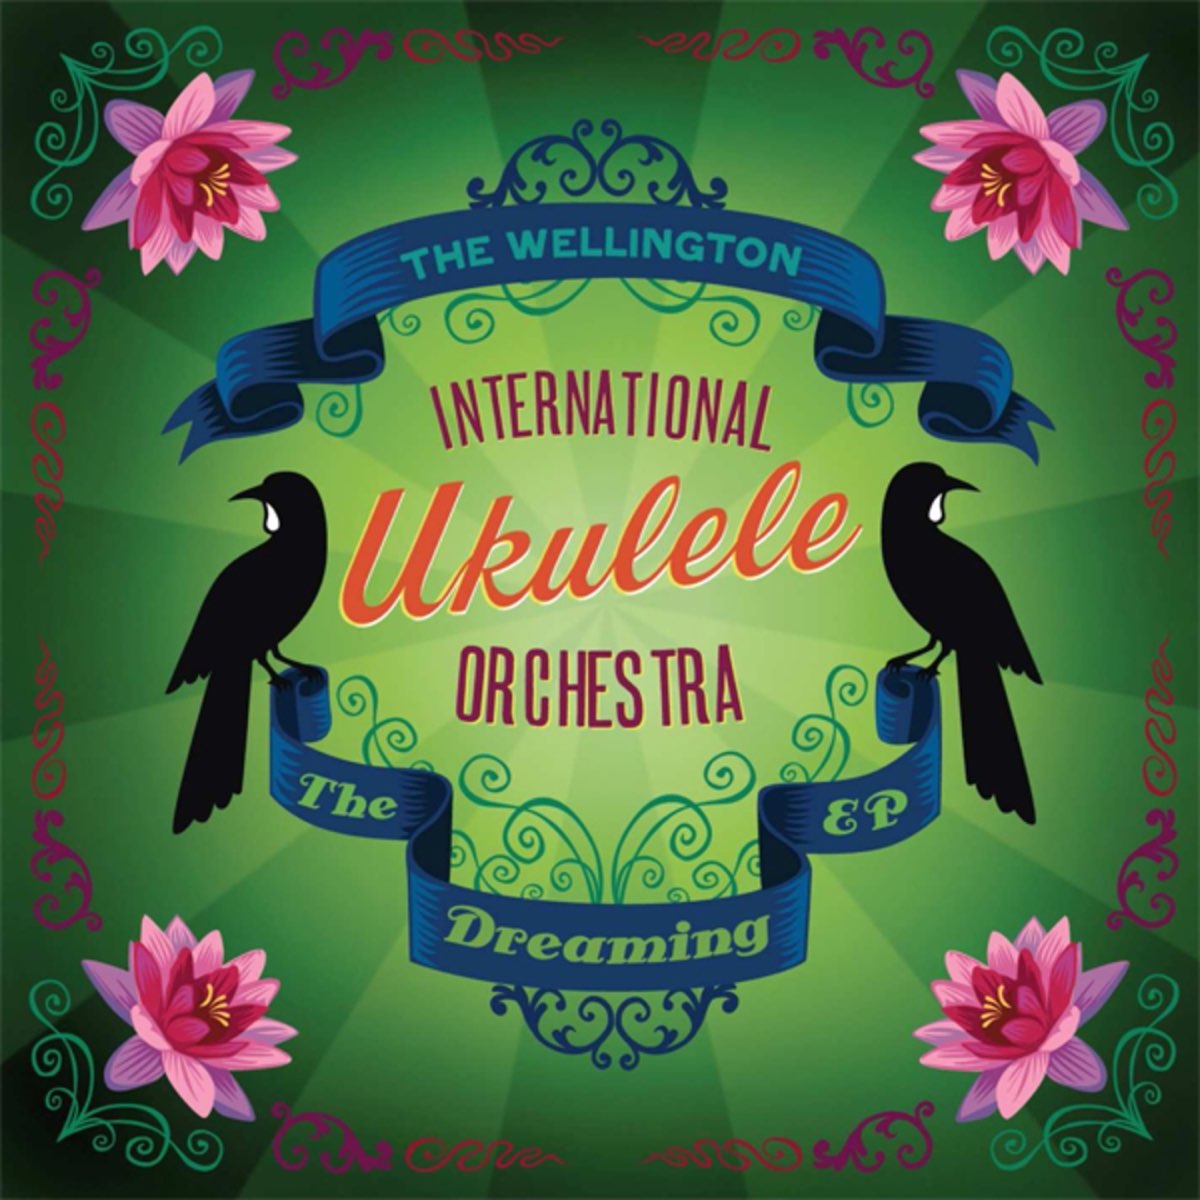 The Dreaming - EP by The Wellington International Ukulele Orchestra on  Apple Music